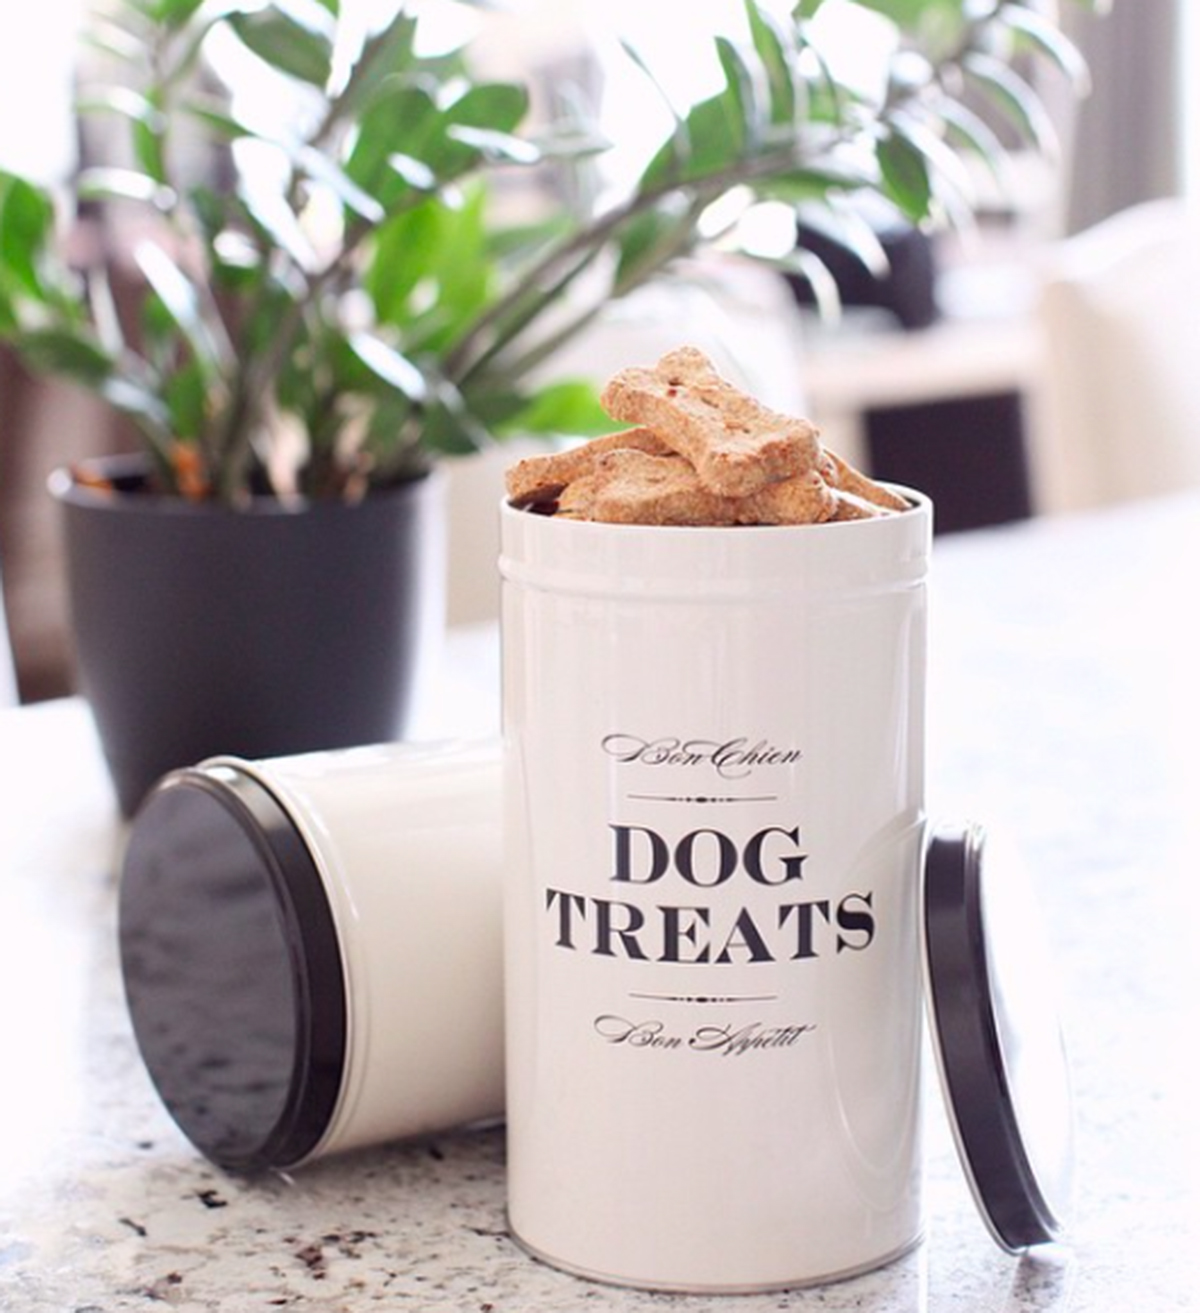 Amazing Pet Gifts To Spoil Your Fur-Baby This Holiday